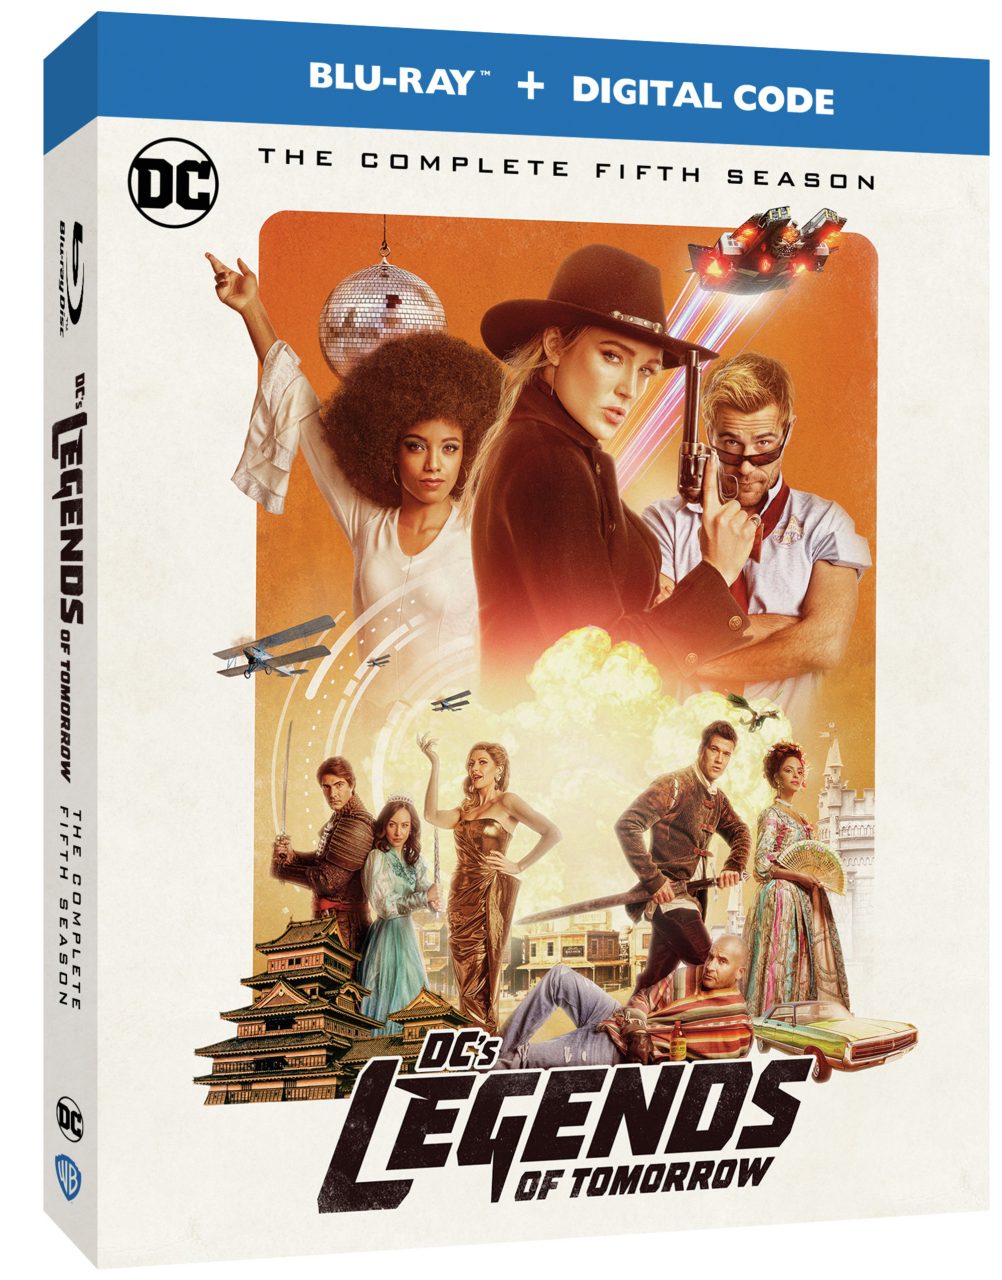 DC's Legends Of Tomorrow: The Complete Fifth Season Blu-Ray cover (Warner Bros. Home Entertainment)